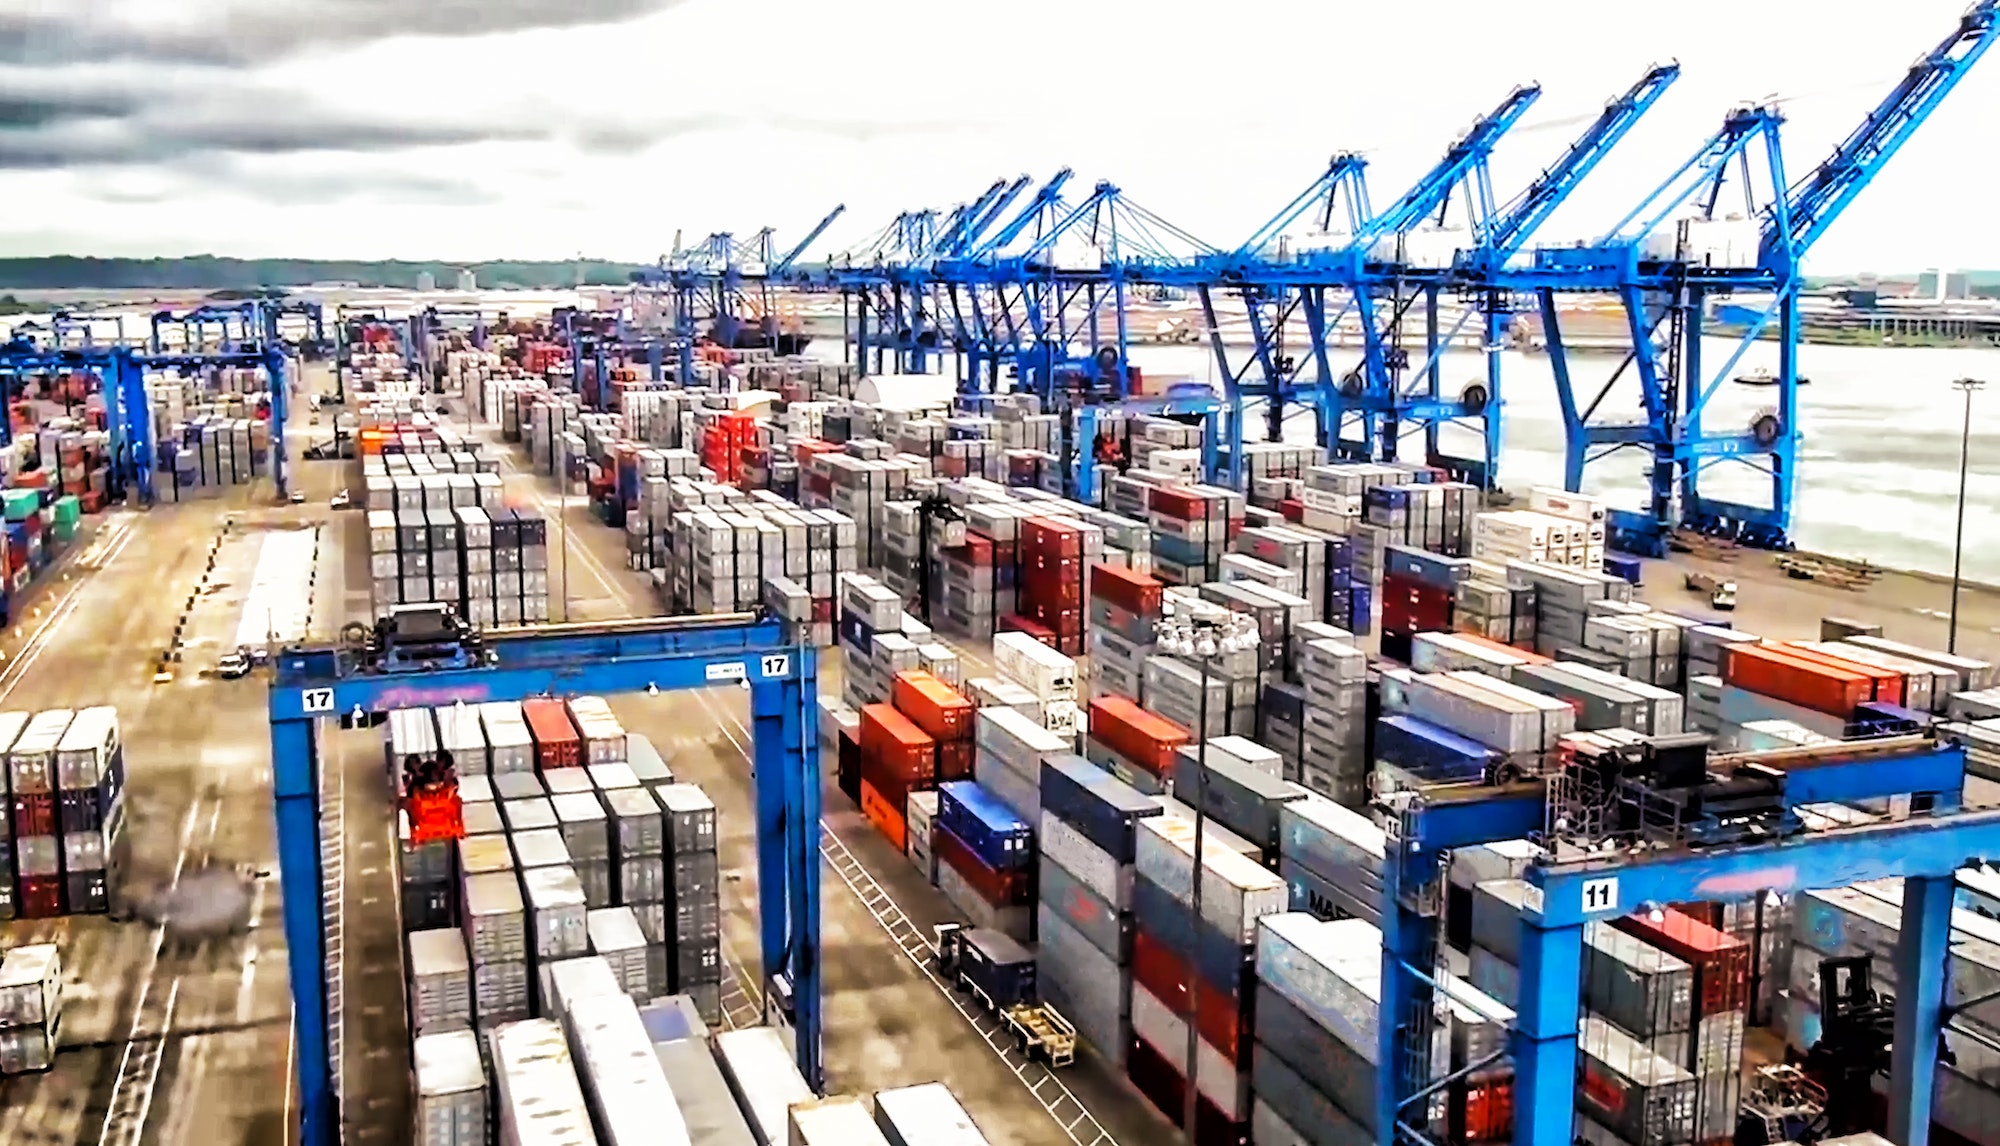 Cranes and containers at international logistics center port